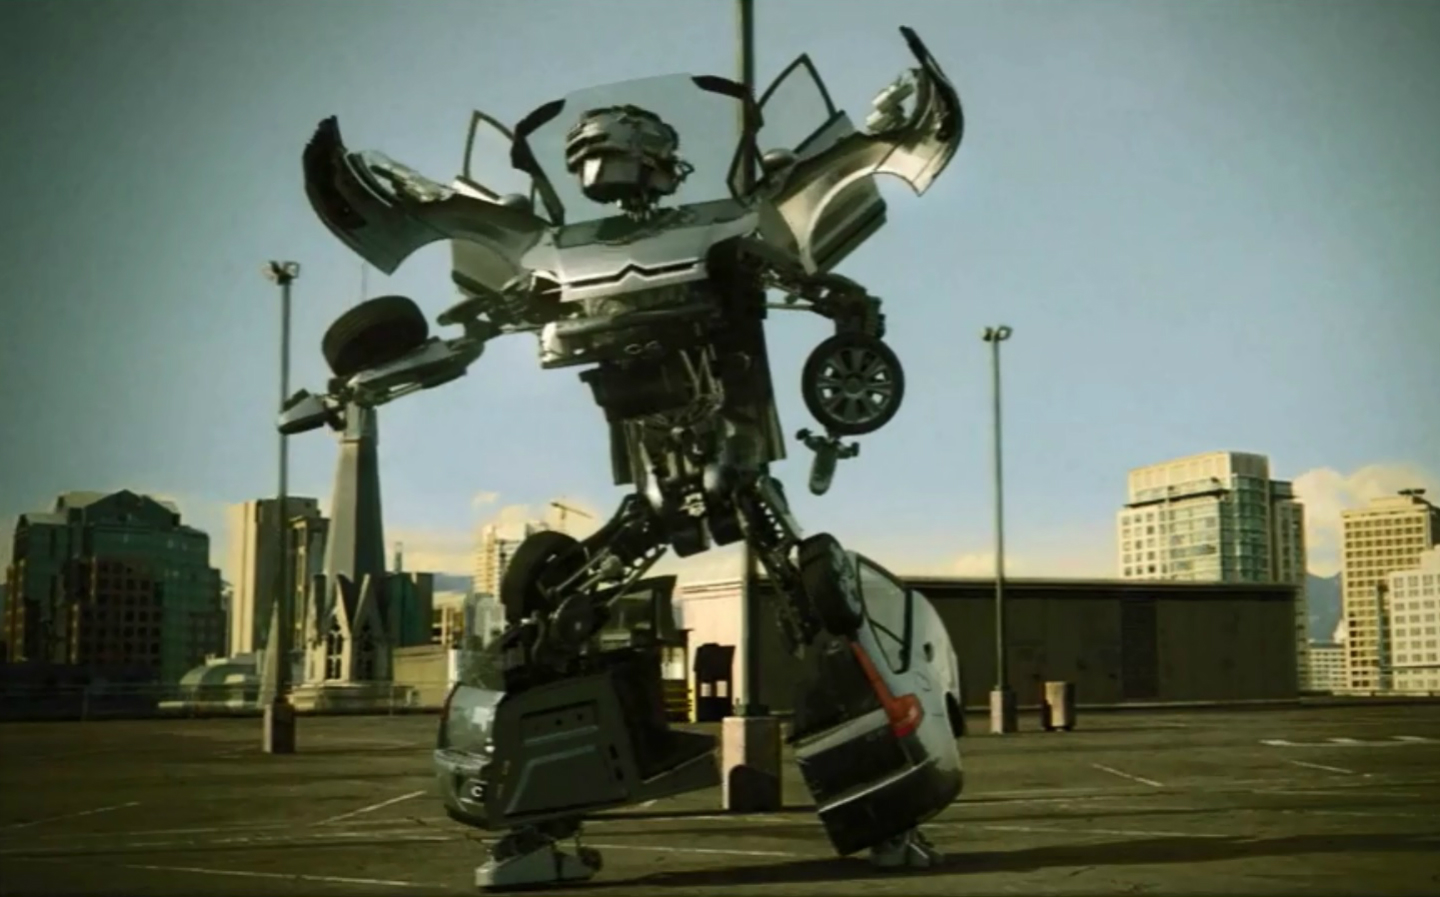 Citroen C4 Alive with Technology Transformers danging robot TV advert